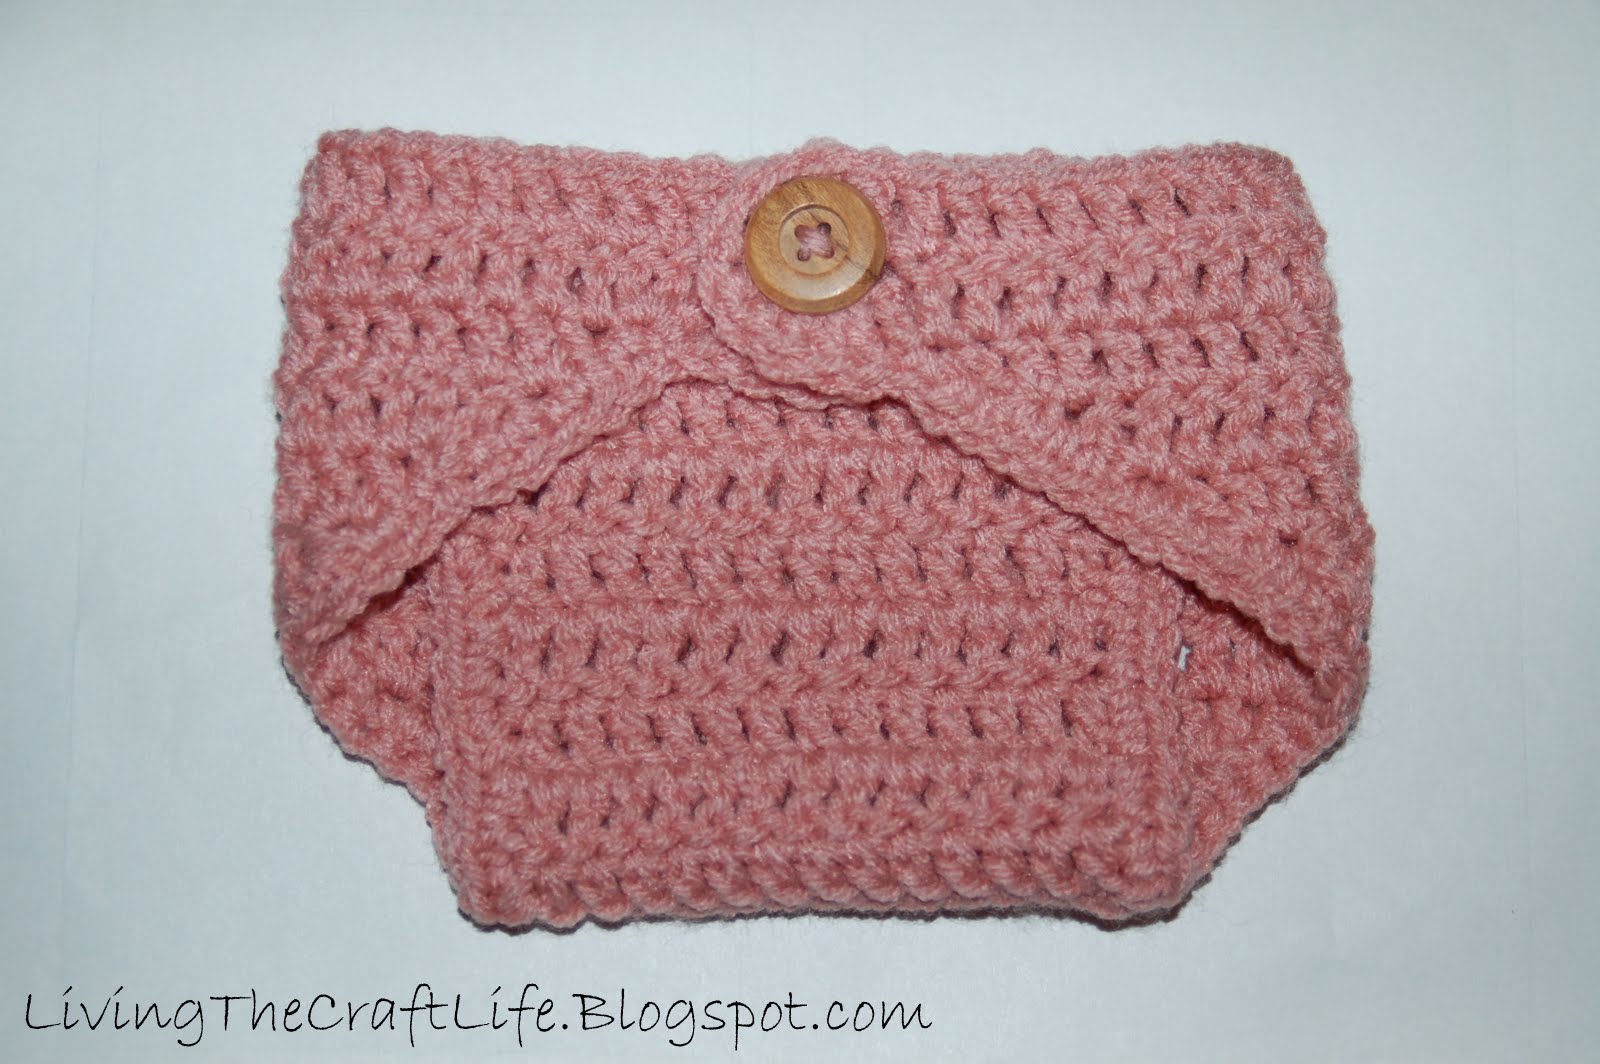 Pattern for doll diaper? - Cloth Diaper Sewing 101 - BabyCenter